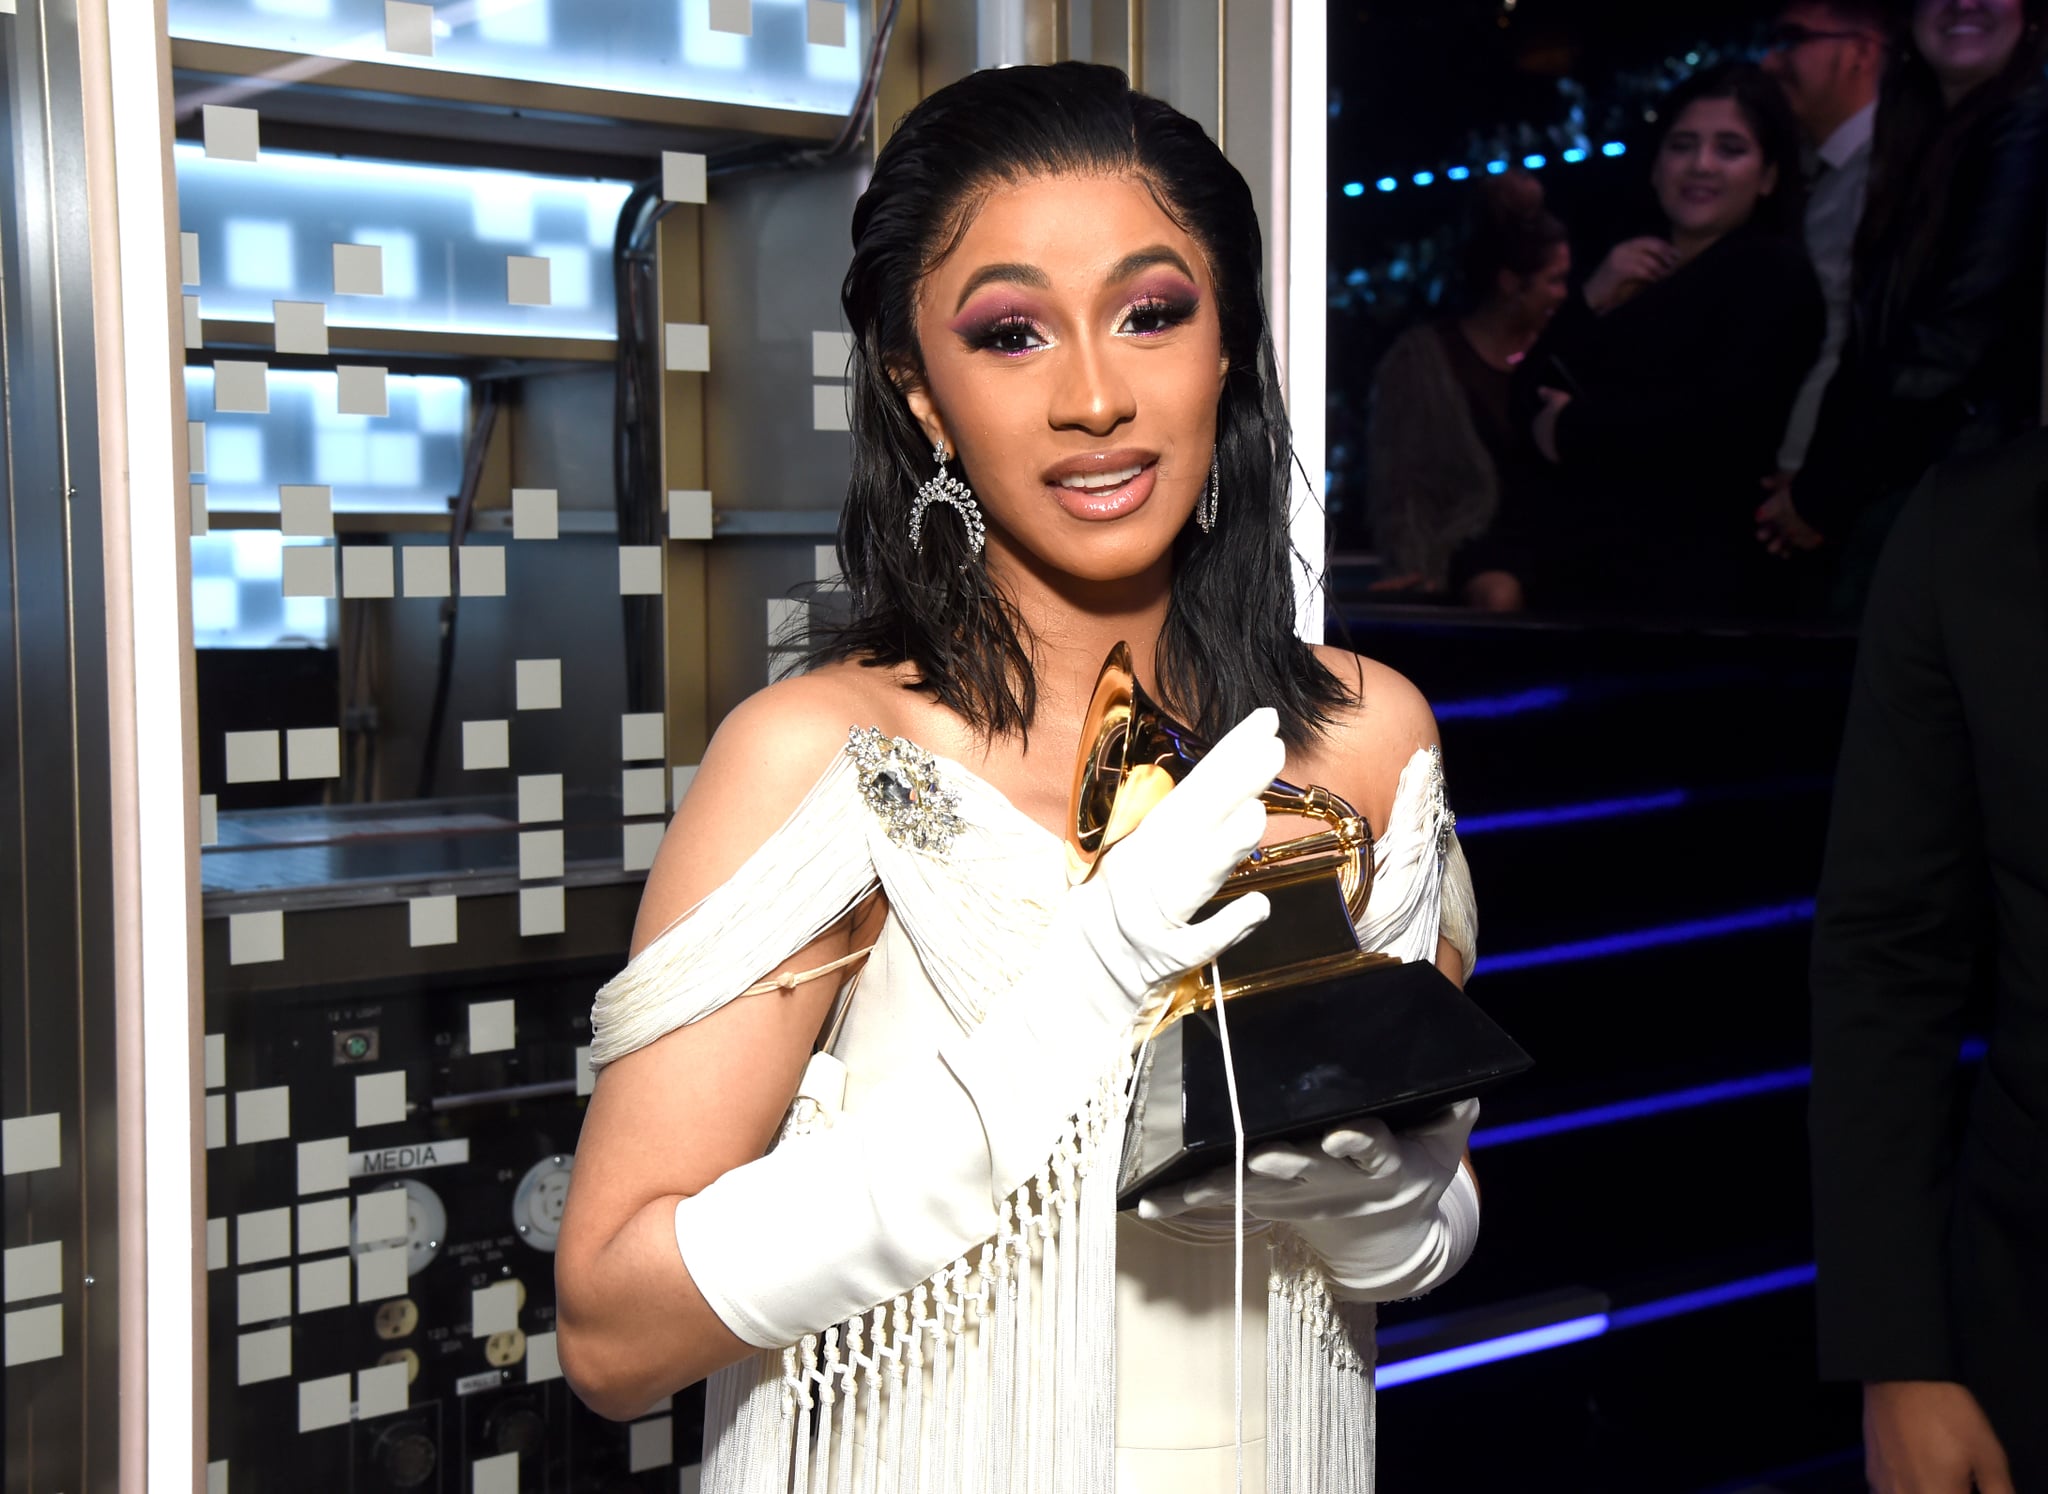 LOS ANGELES, CA - FEBRUARY 10:  Cardi B, winner of Best Rap Album for 'Invasion of Privacy,'  poses backstage during the 61st Annual GRAMMY Awards at Staples Center on February 10, 2019 in Los Angeles, California.  (Photo by Michael Kovac/Getty Images for The Recording Academy)